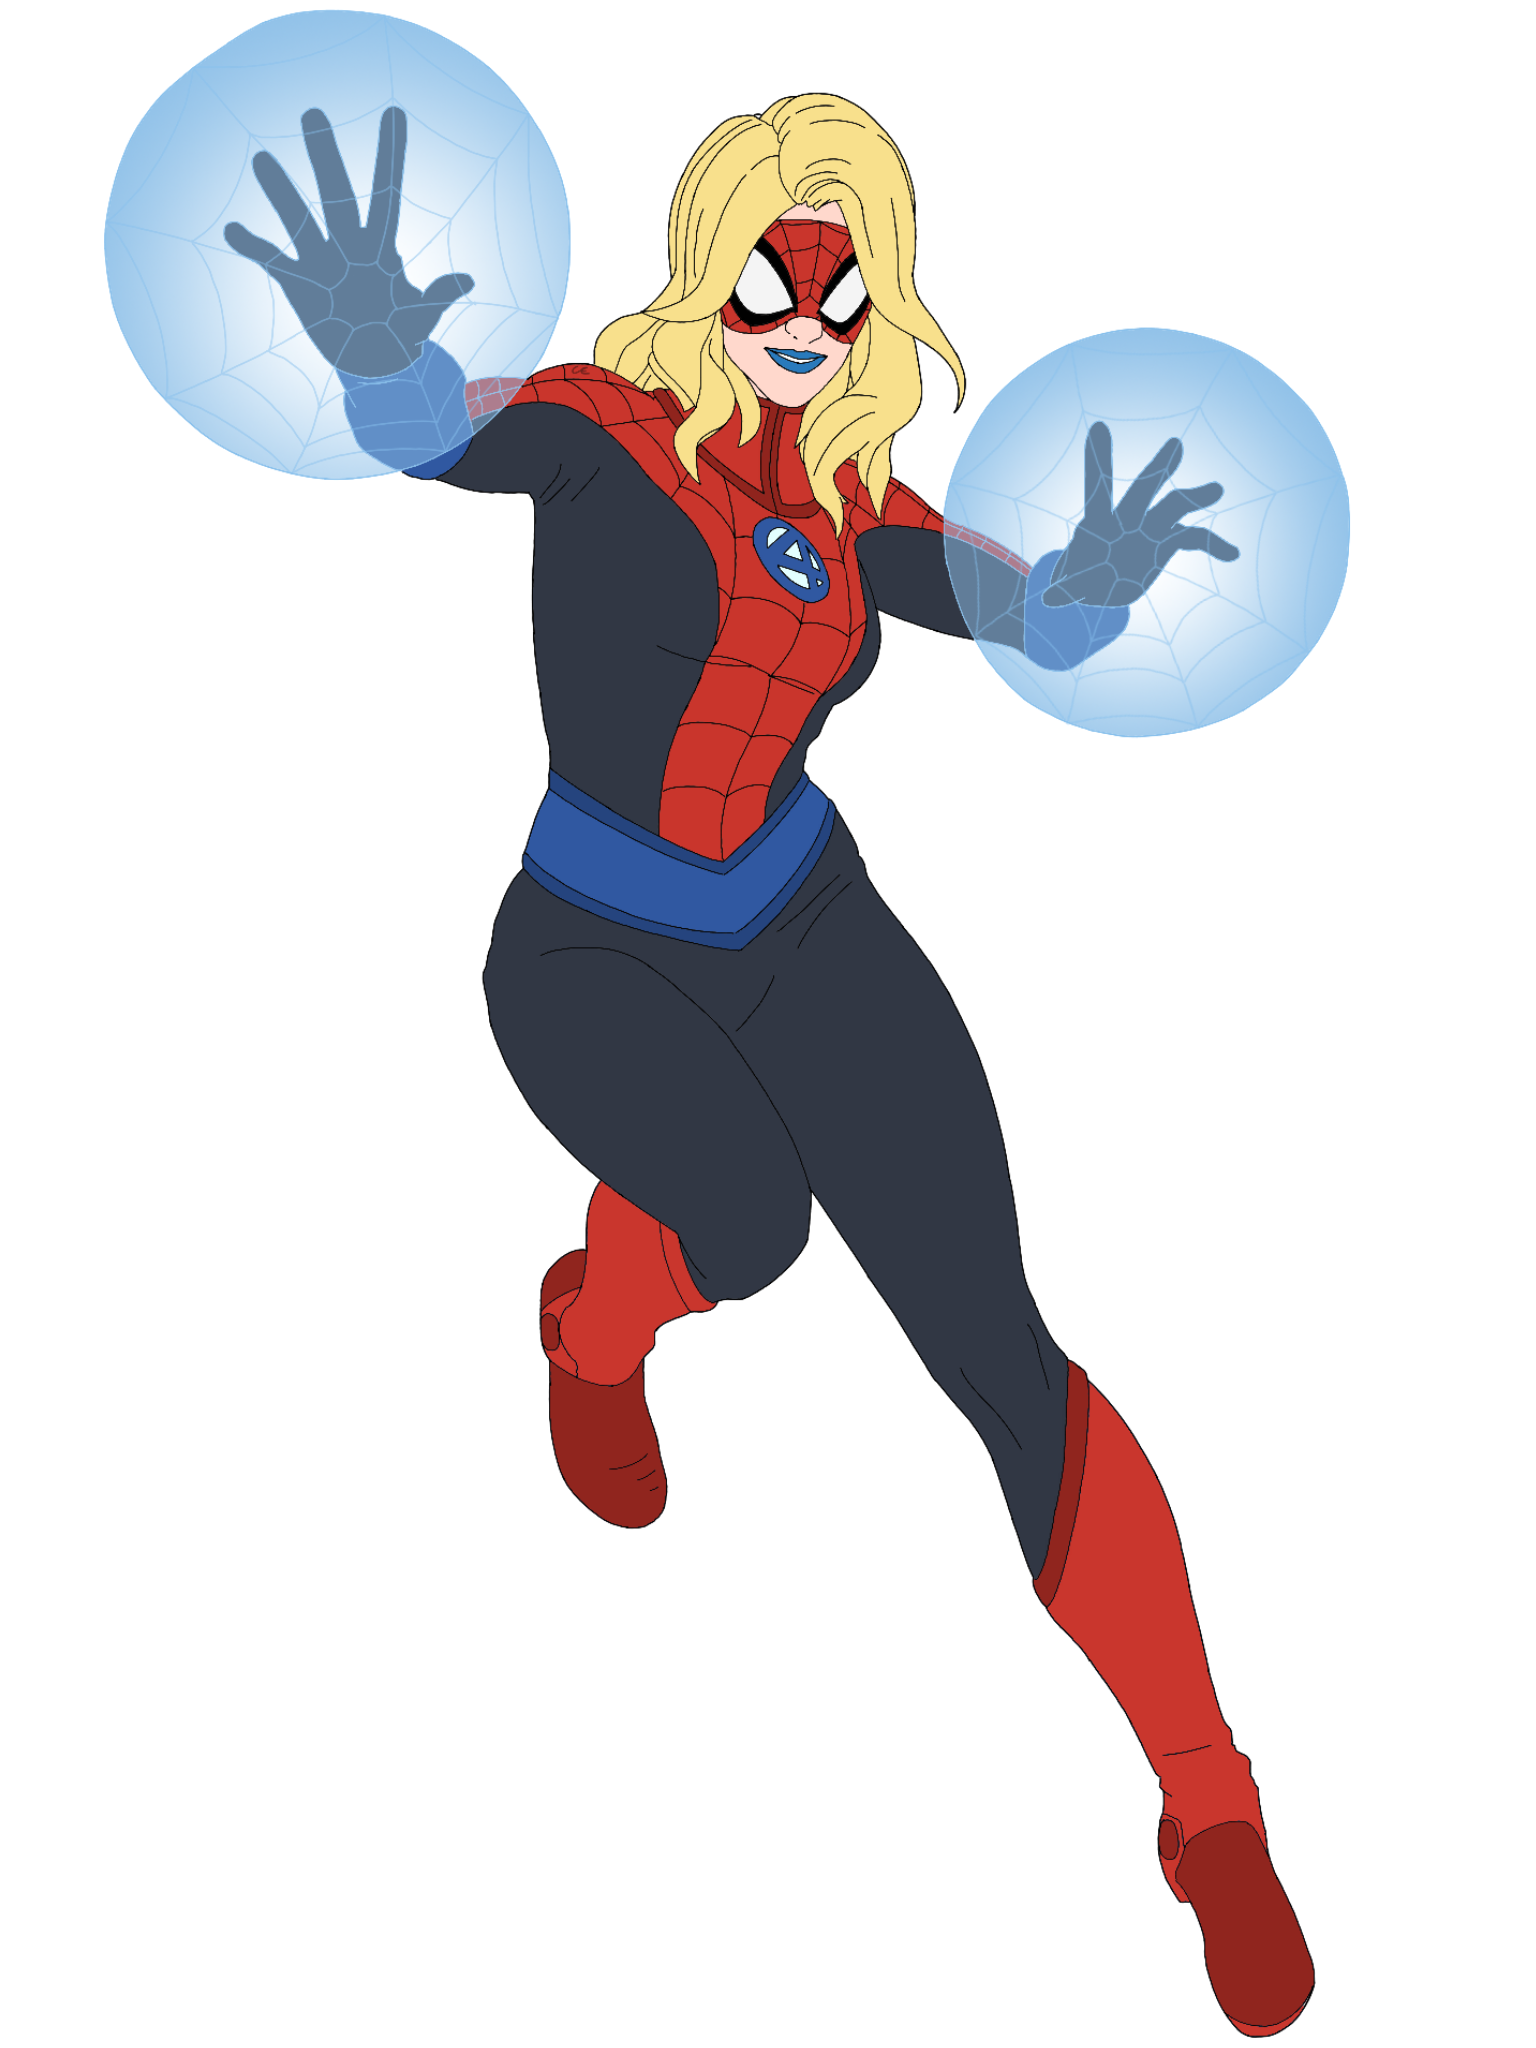 Invisible Woman x Spider-Man by LordDerpington171 on DeviantArt